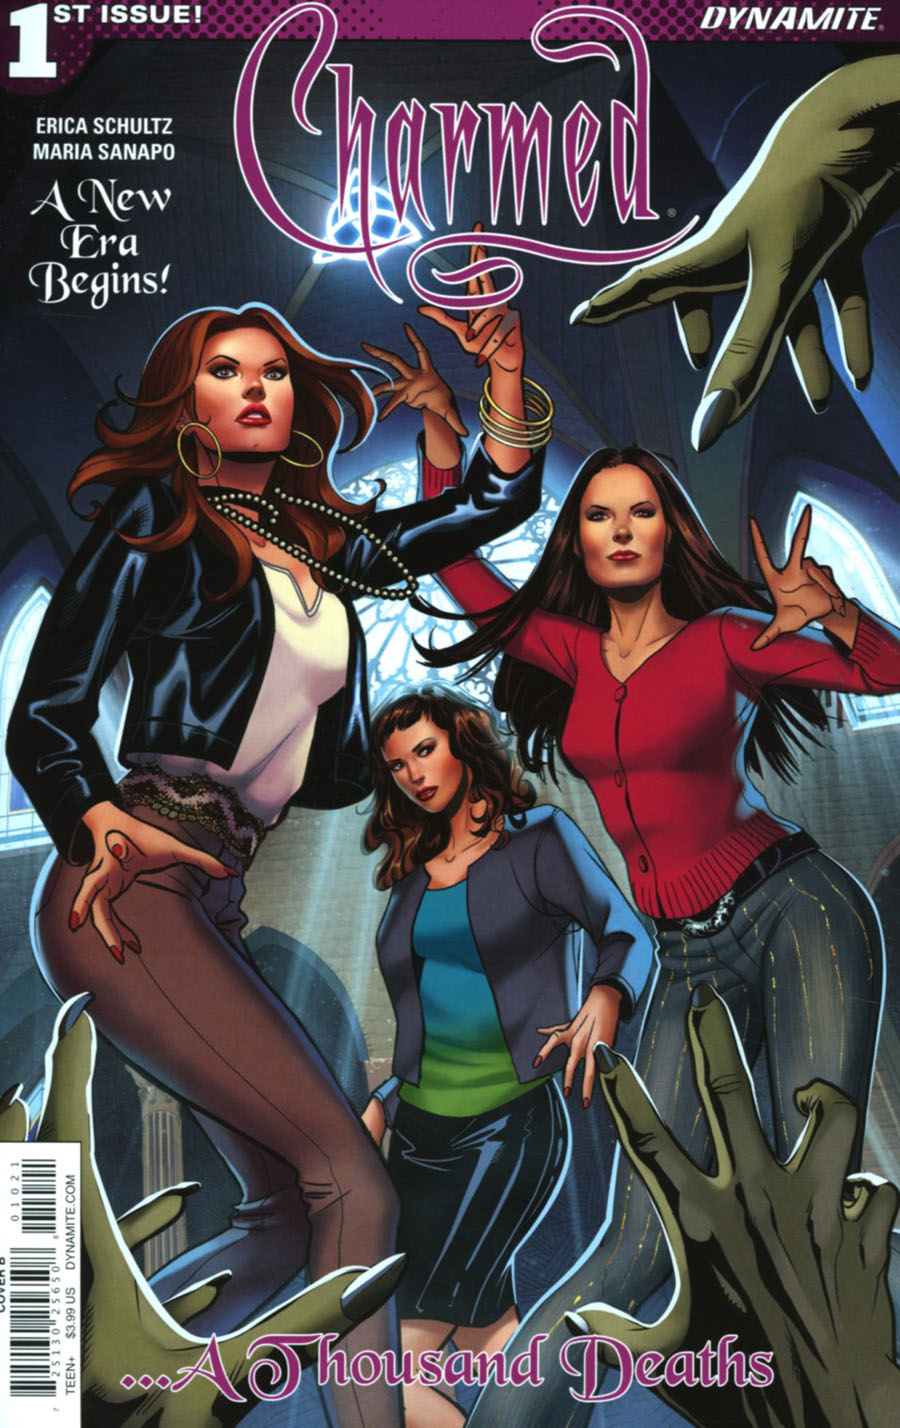 Charmed Vol 2 #1 Cover B Variant Maria Sanapo Cover